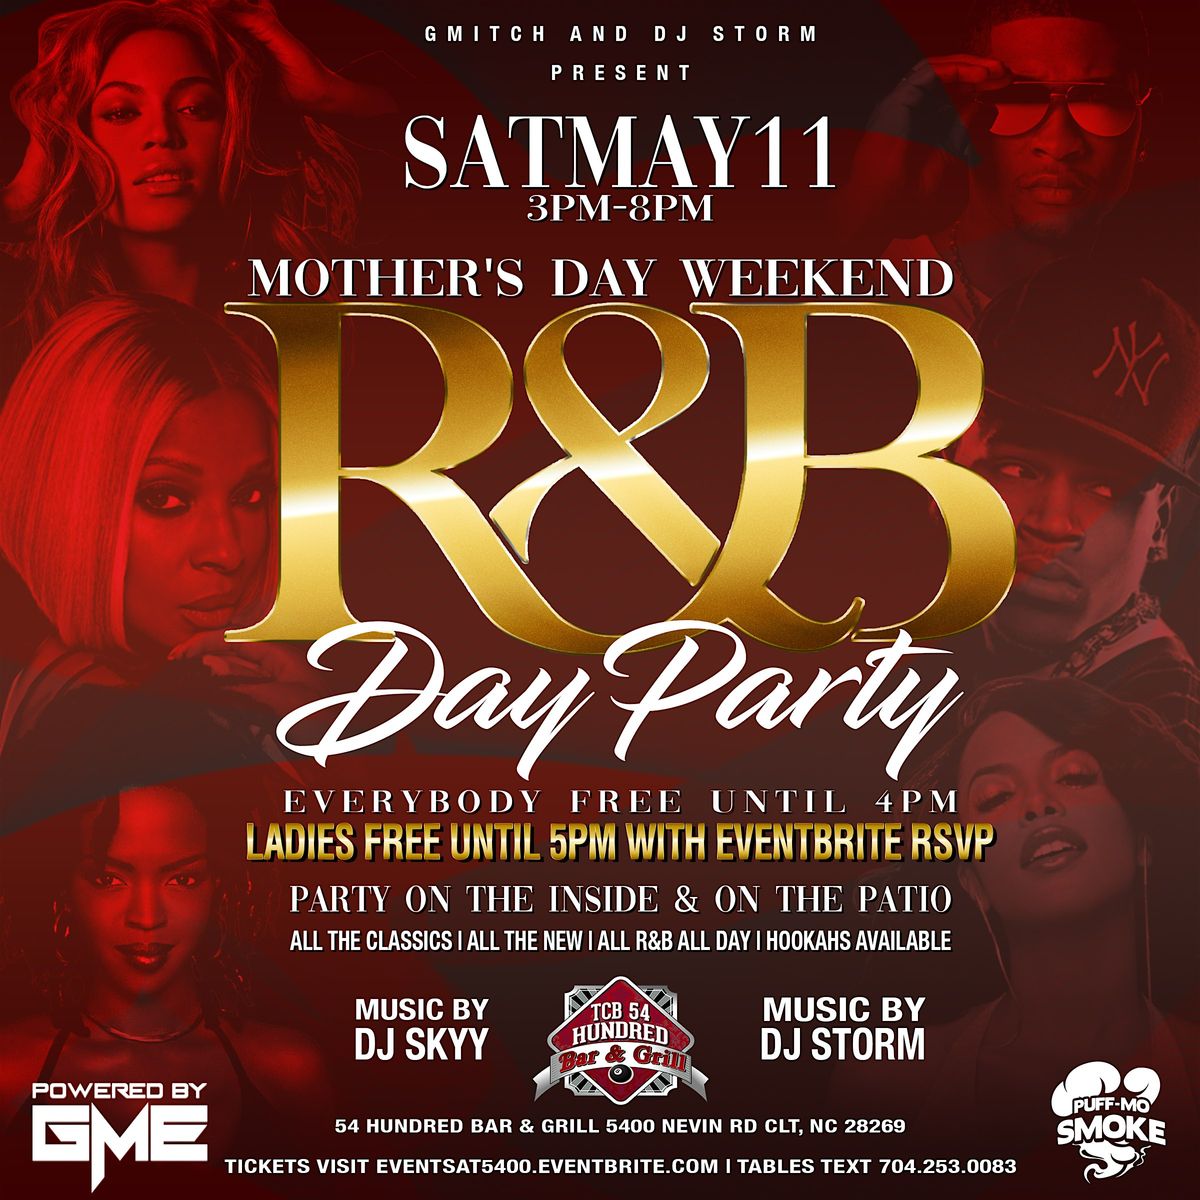 R&B Day Party